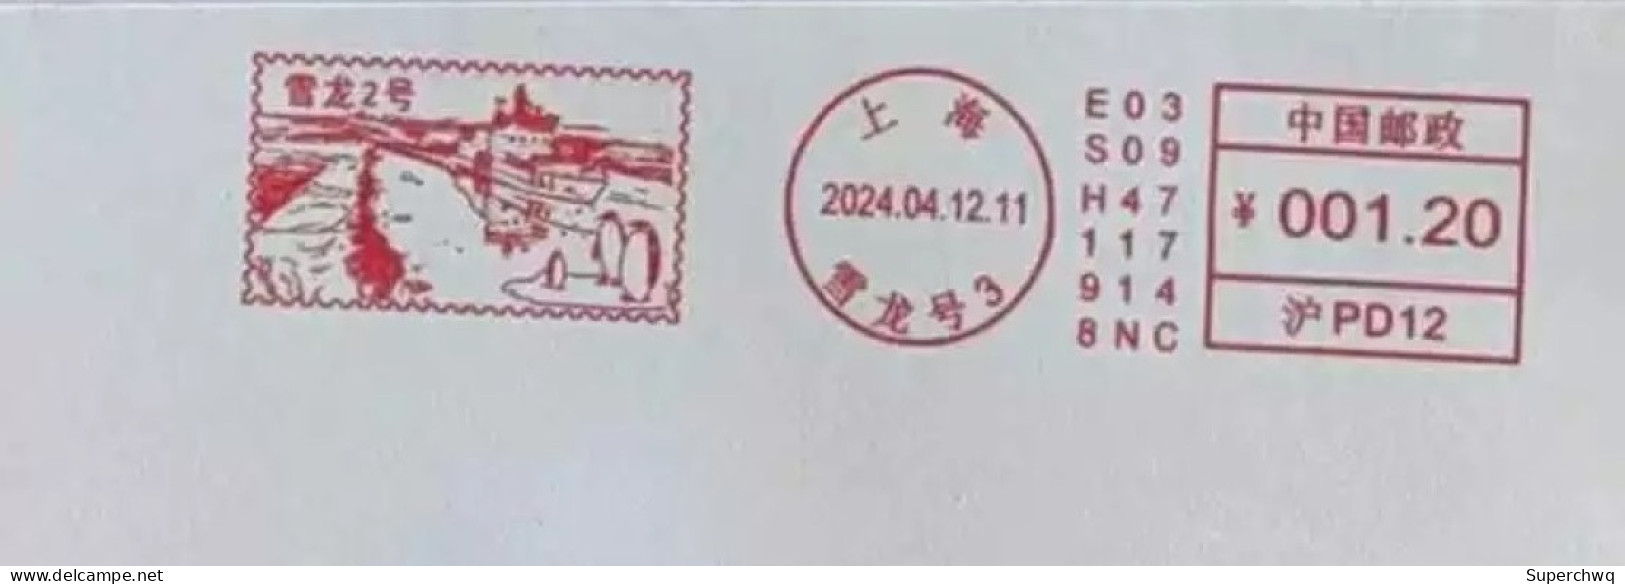 China Posted Cover，The Xuelong 2 Polar Scientific Expedition Ship Postage Machine Stamp - Briefe